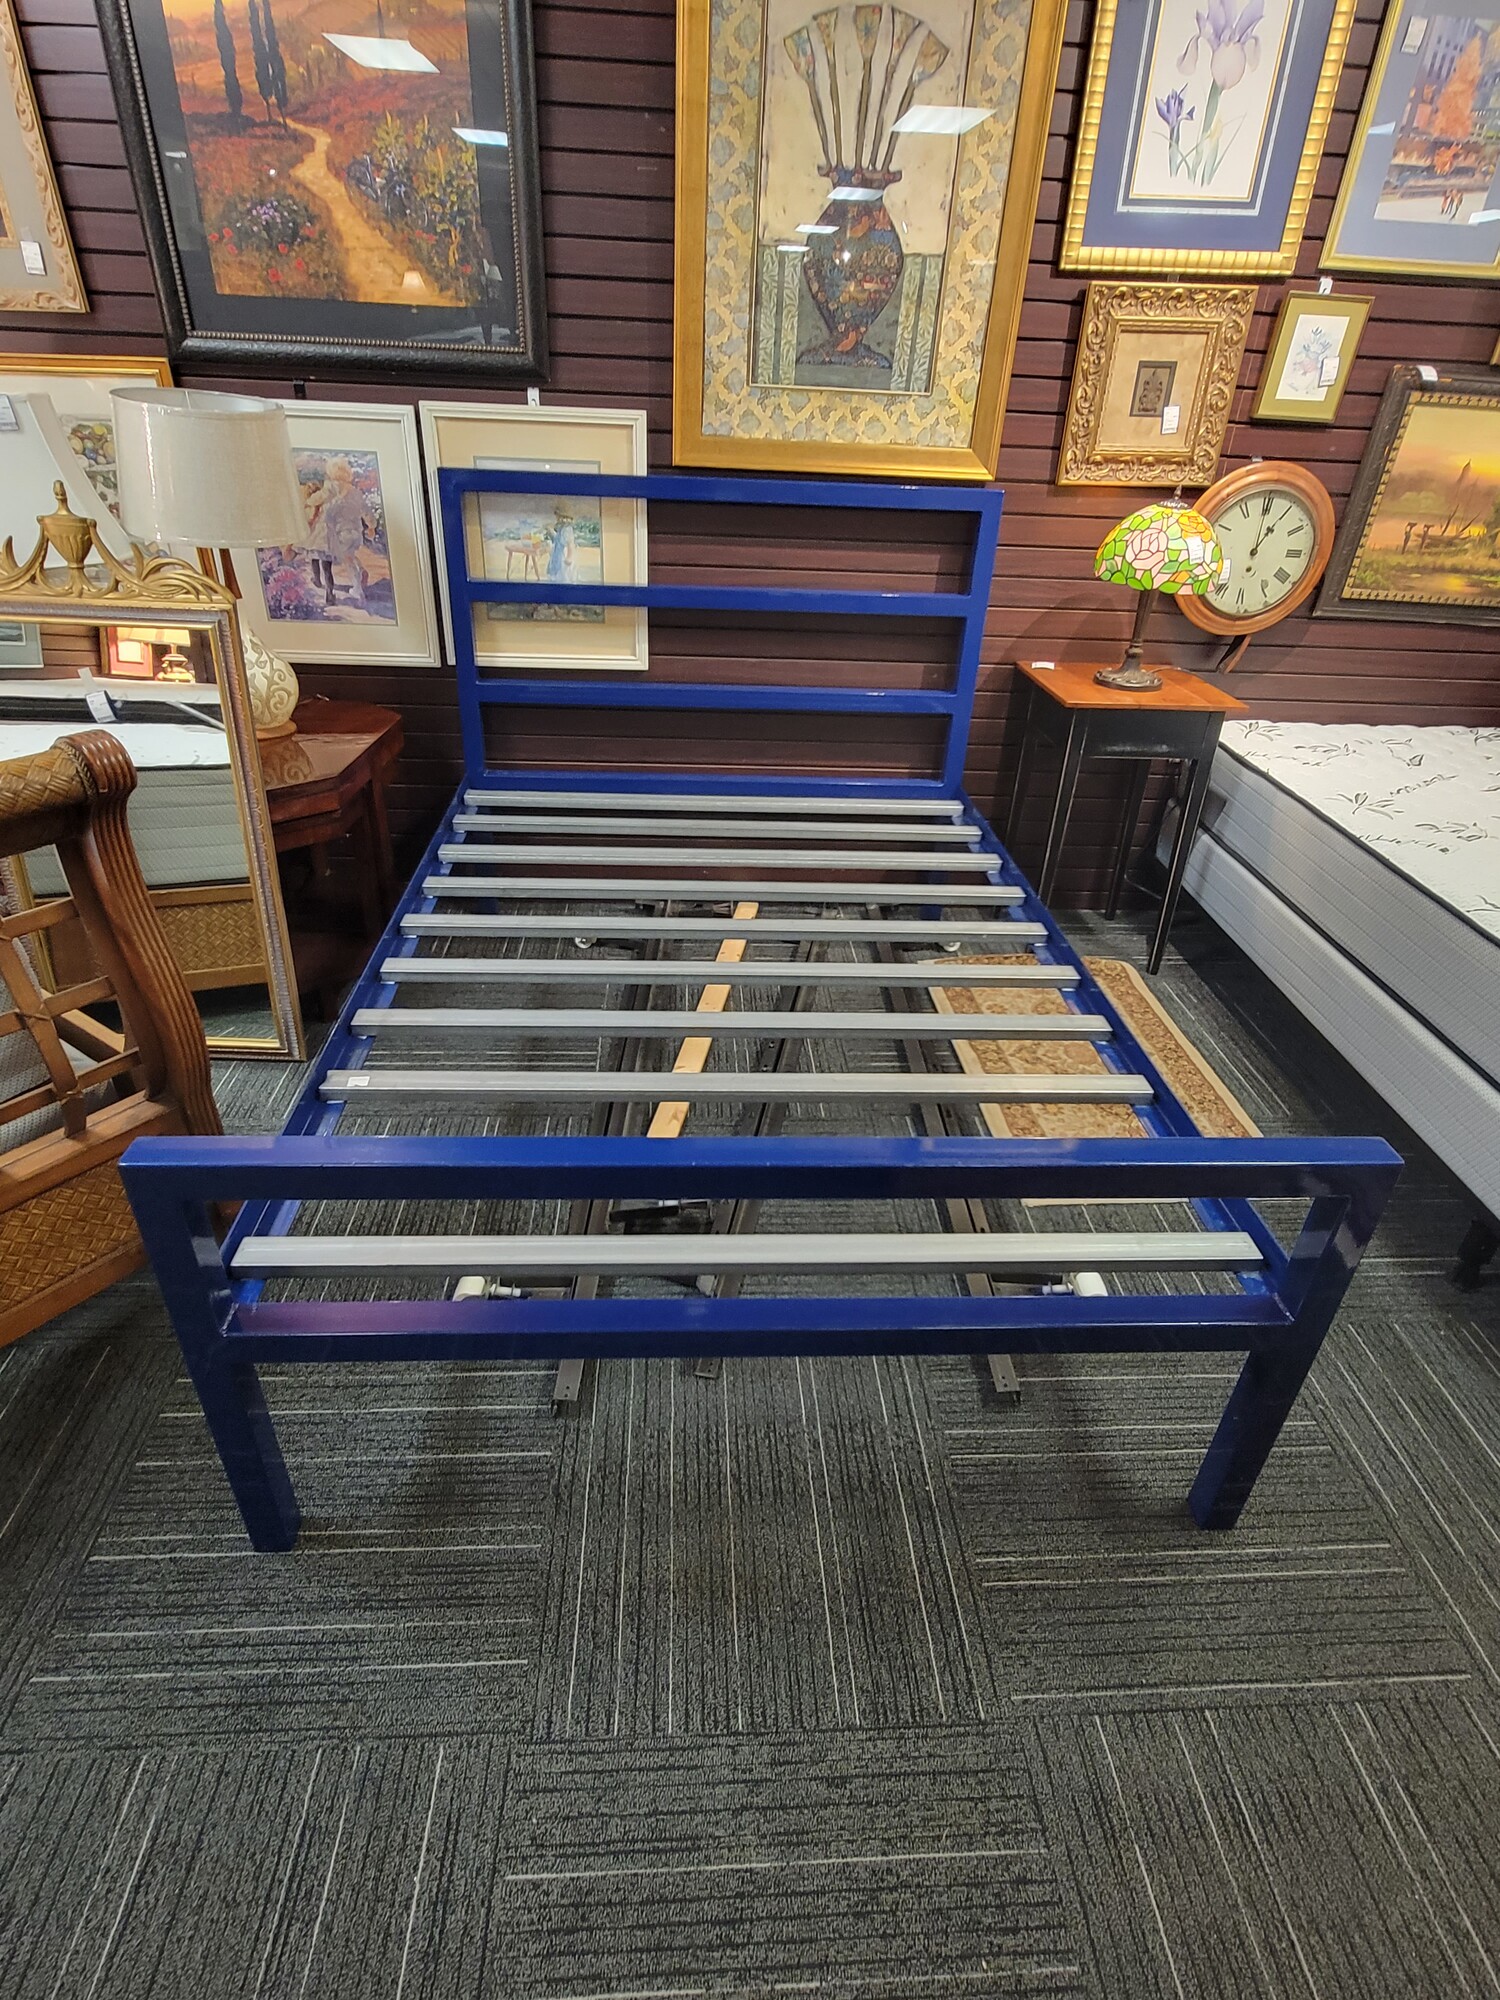 Room & Board Full  Bright Blue Bed in good condition.  Built like a tank; this thing will never wobble!   Includes Headboard; Footboard; rails & metal slats.   Measures 47' tall; 55' wide; 82' long.